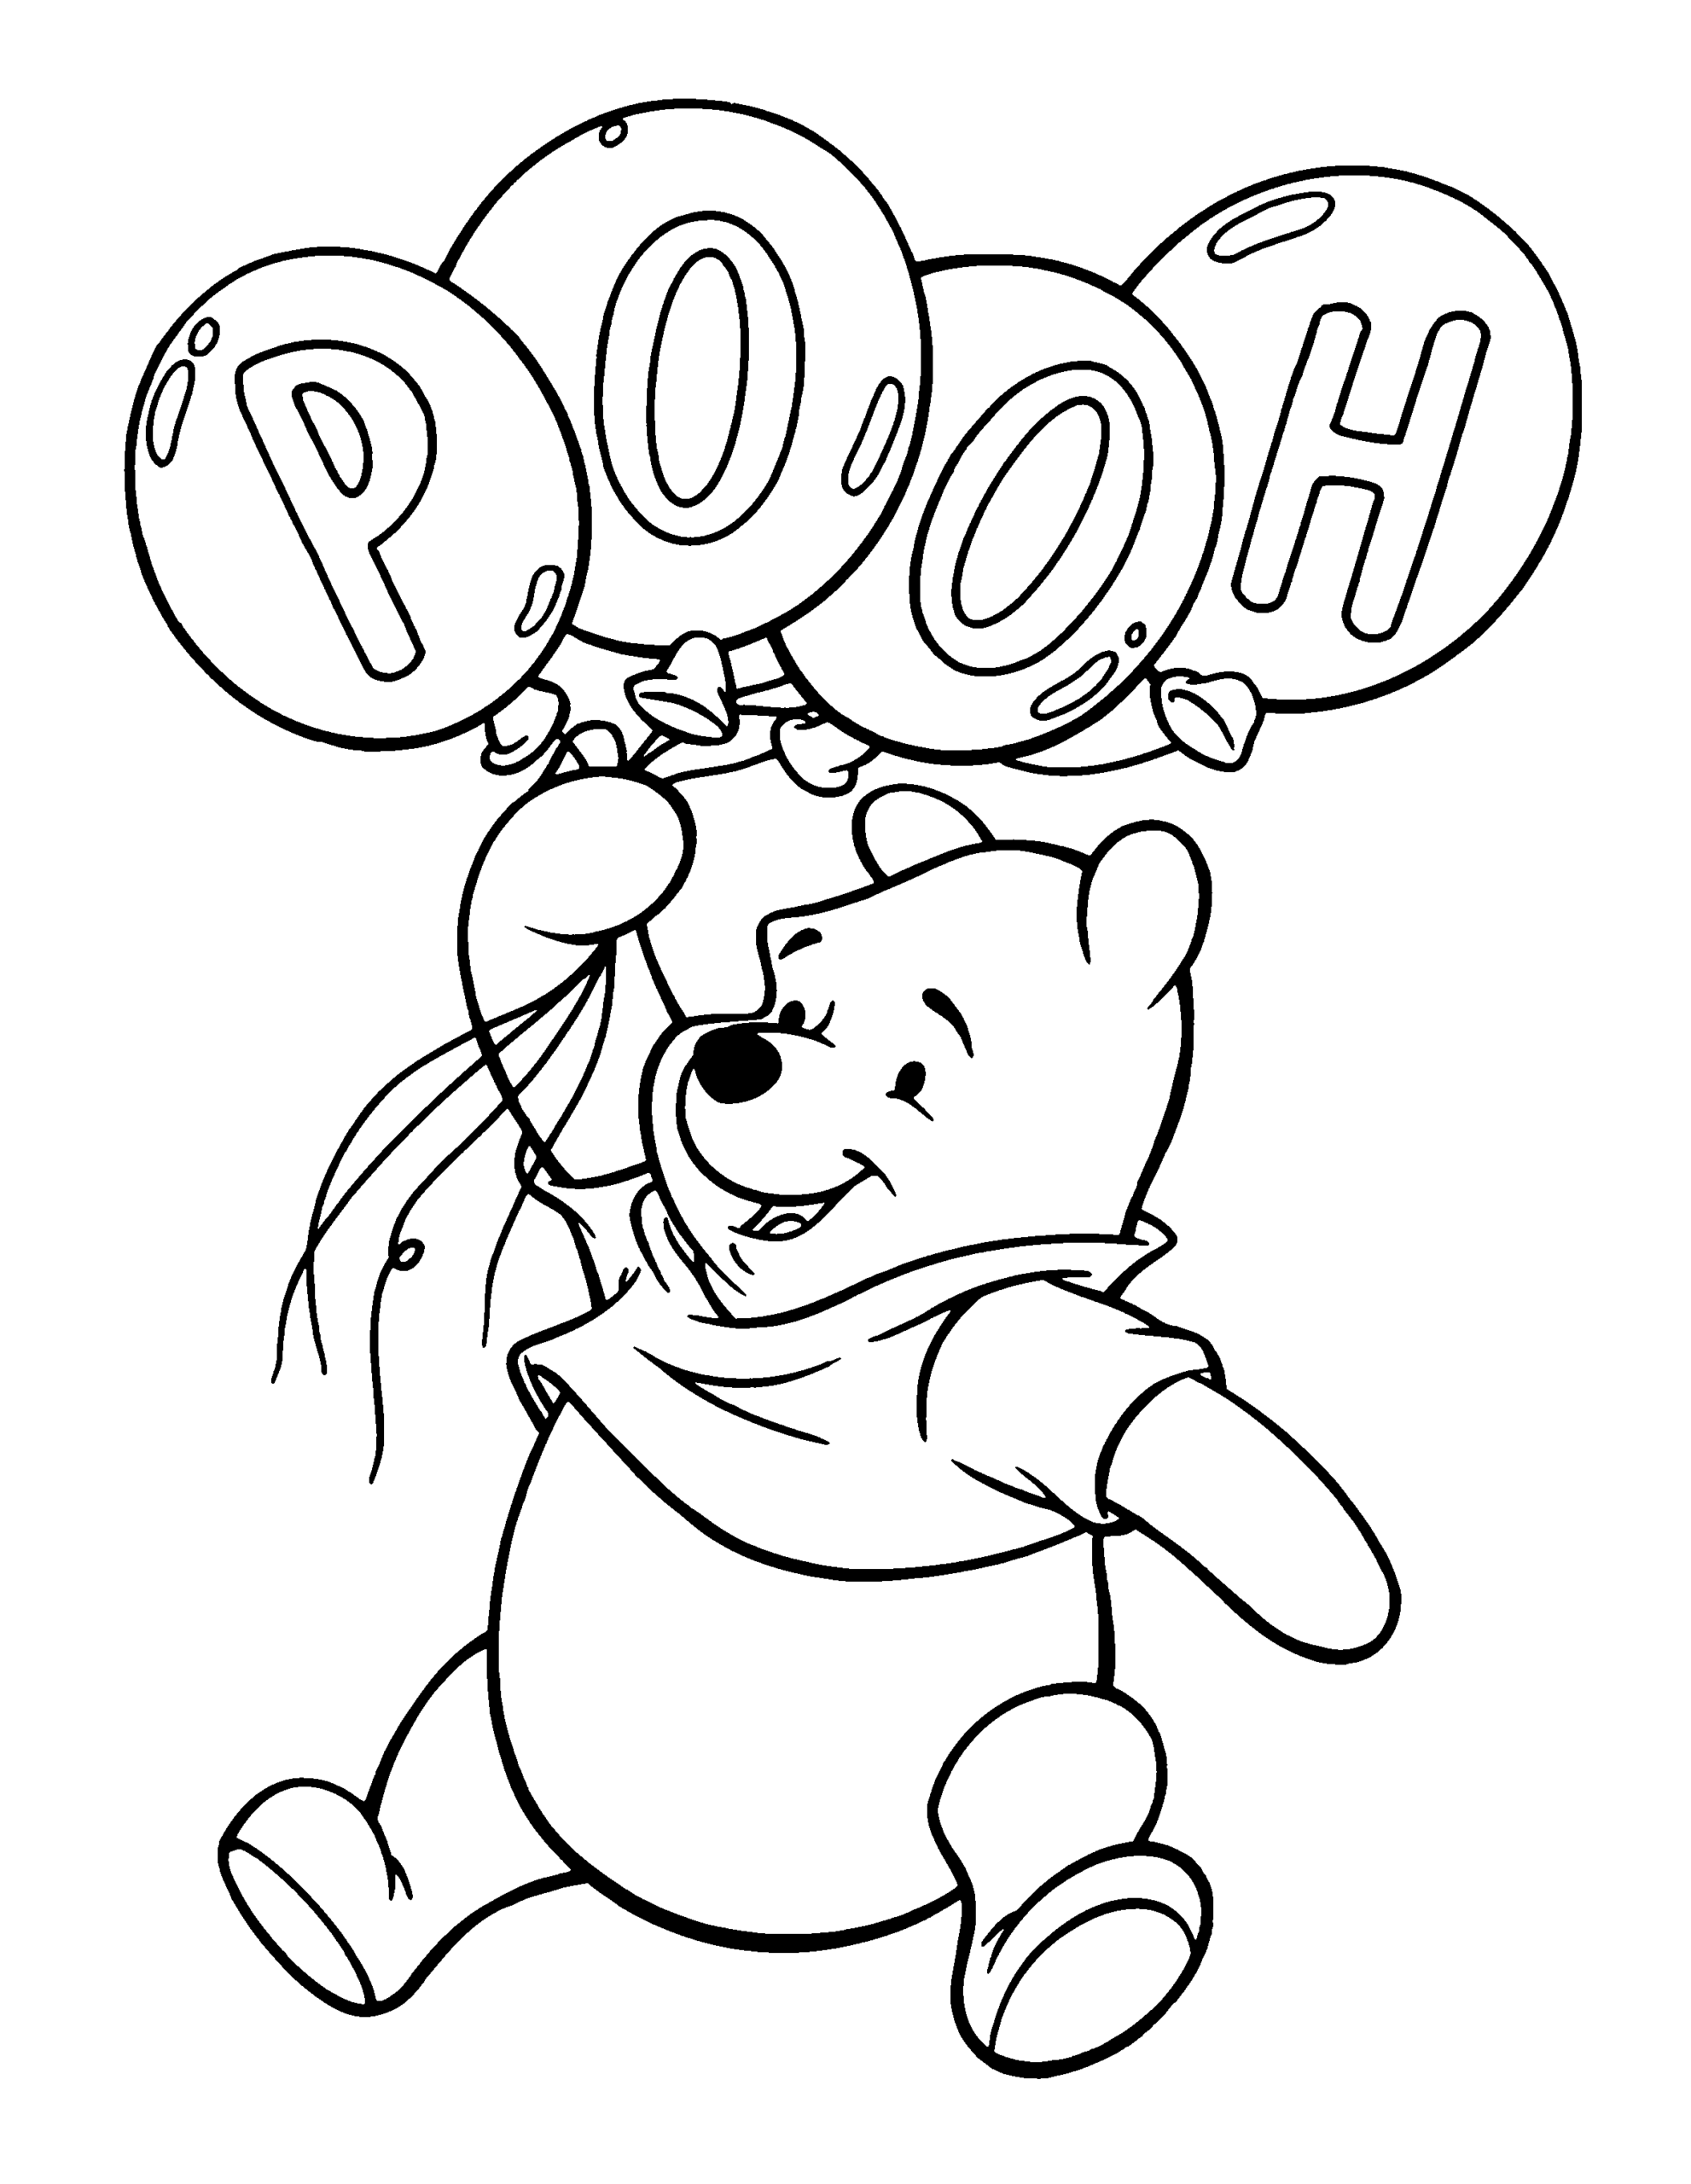 Winnie the Pooh Coloring Pages Cartoons winnie the pooh 121 Printable 2020 7102 Coloring4free